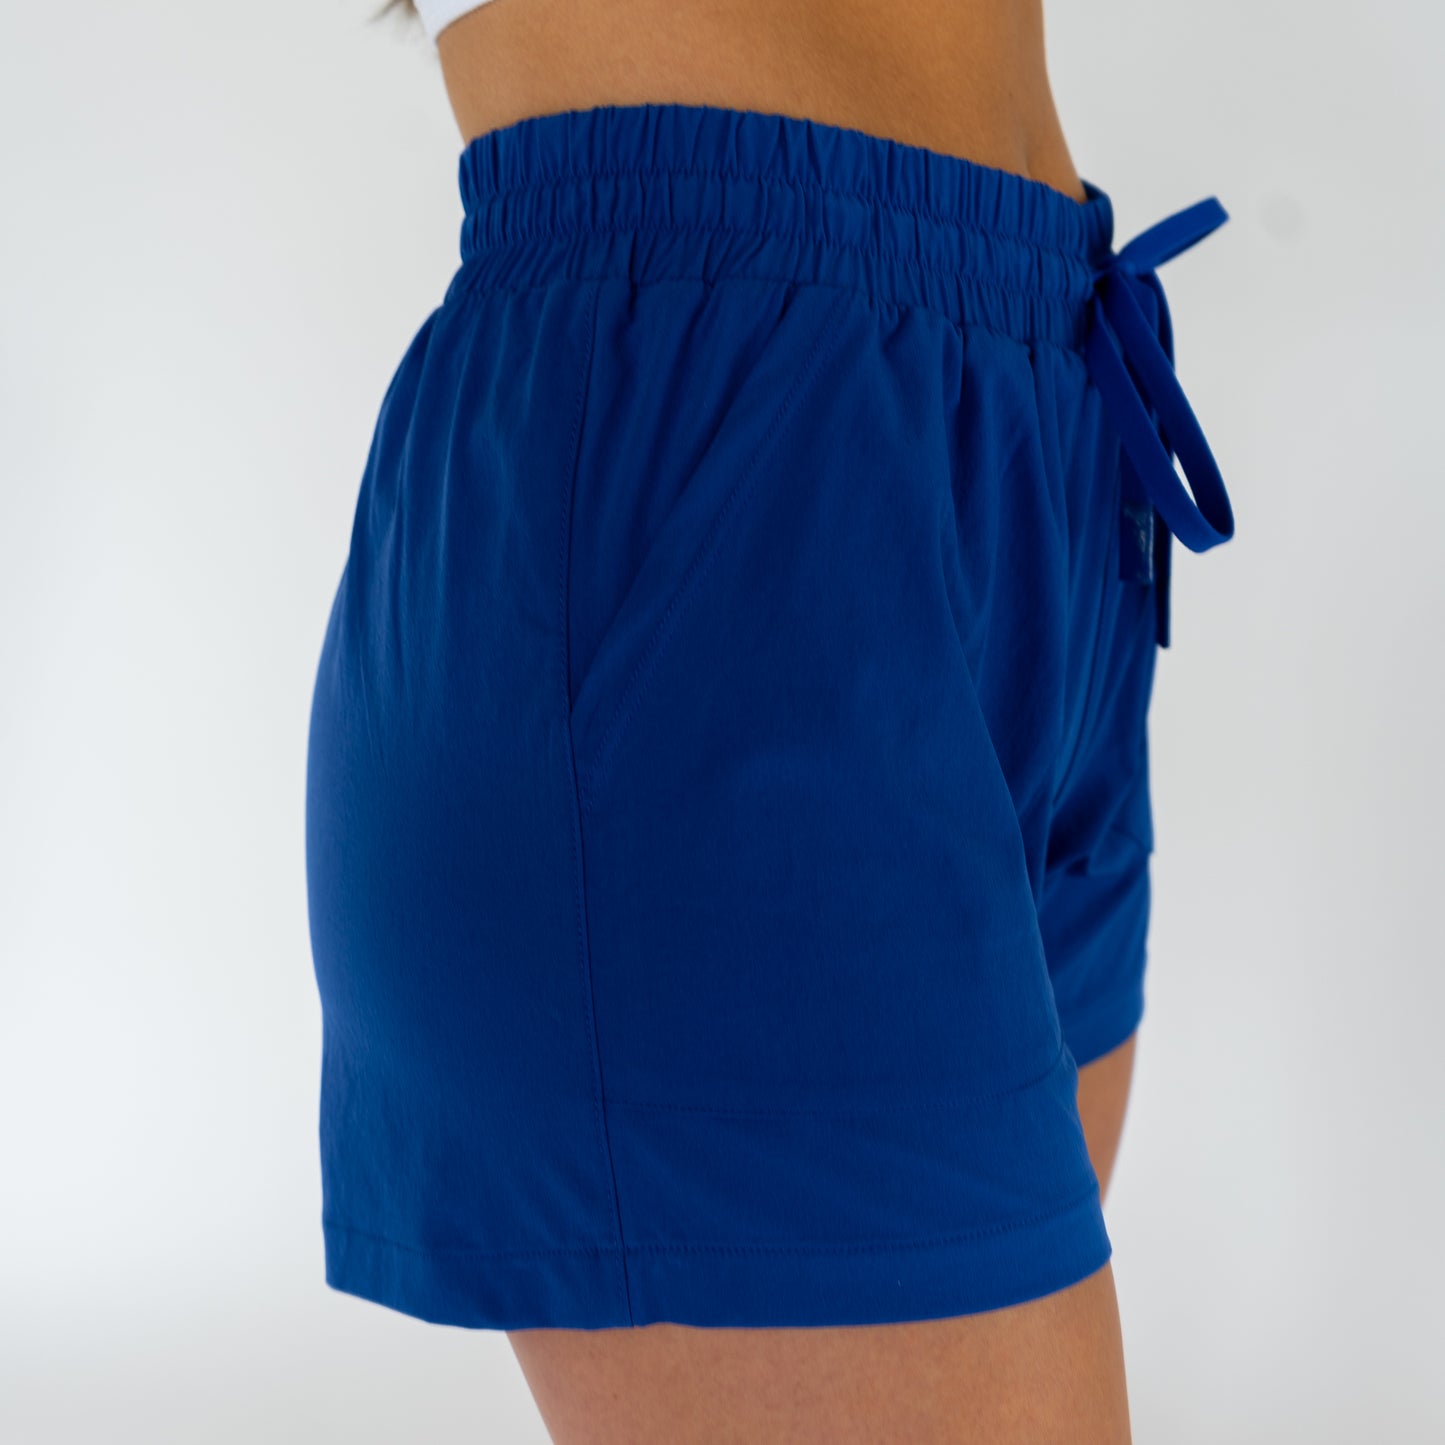 Motier Women Built-In Athleisure Shorts (Royal)